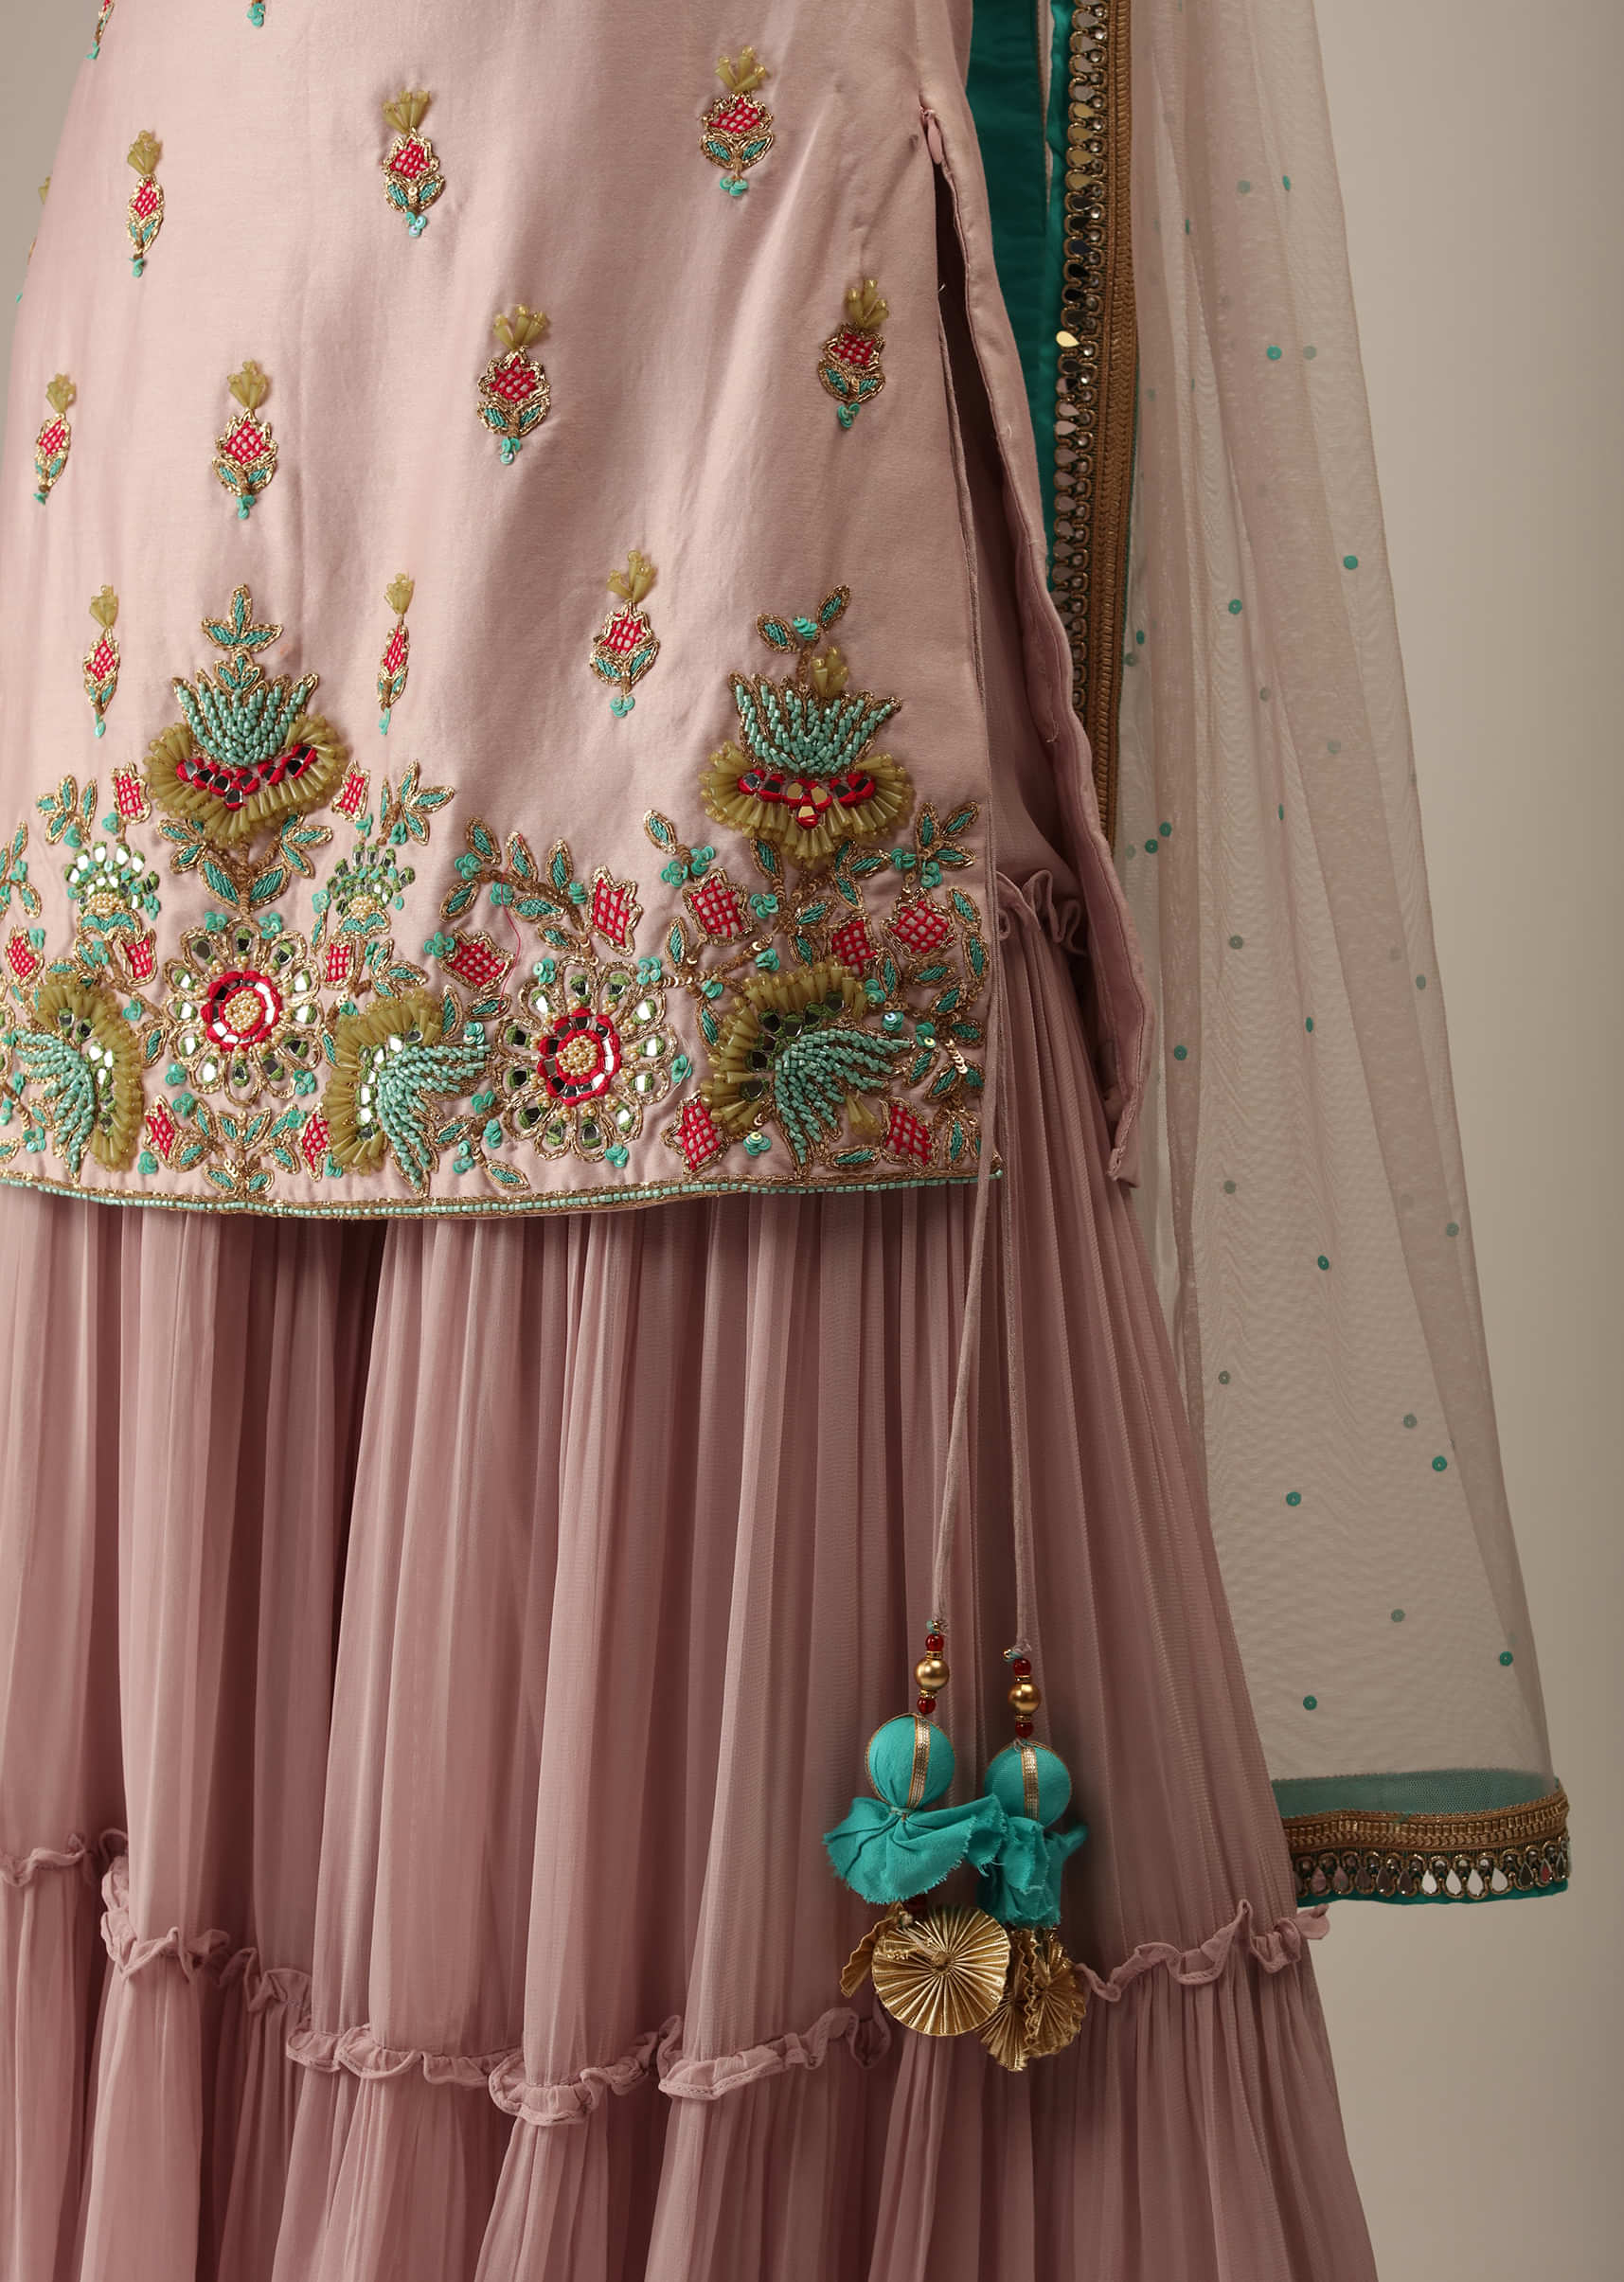 Lilac Snow Sharara Suit In Cotton Silk With Multi Colored 3D Embroidery In Floral Motifs